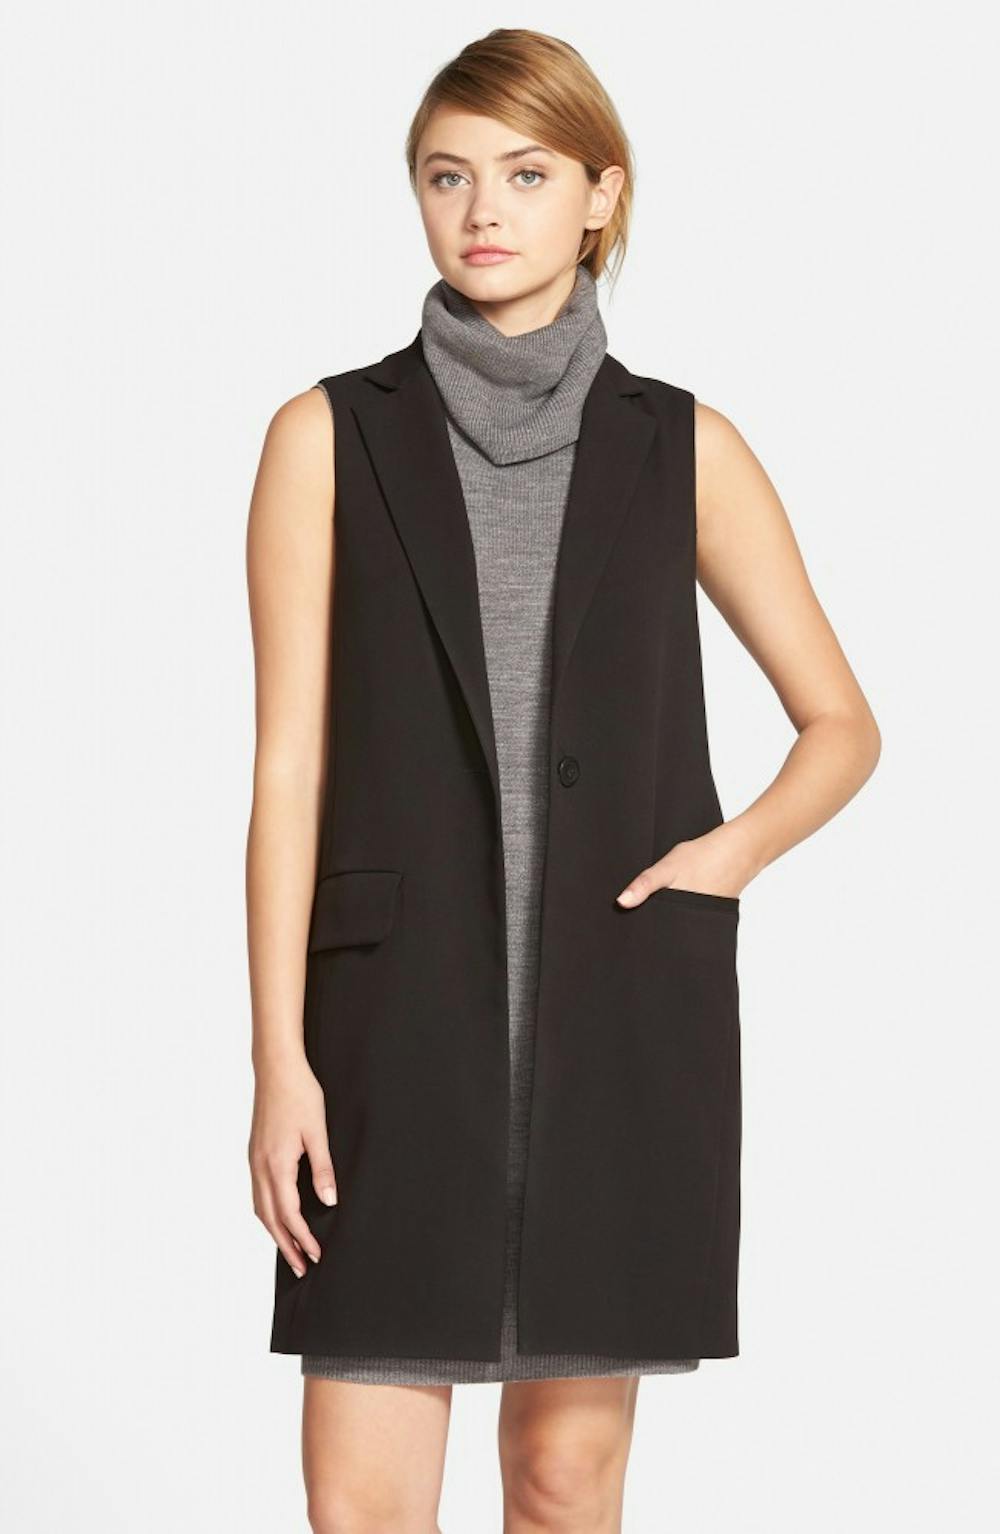 A blazer vest can be layered according to the season, proving more versatile than at first glance. Cupcakes and cashmere "Fairfax" vest, $130, nordstrom.com (Nordstrom)